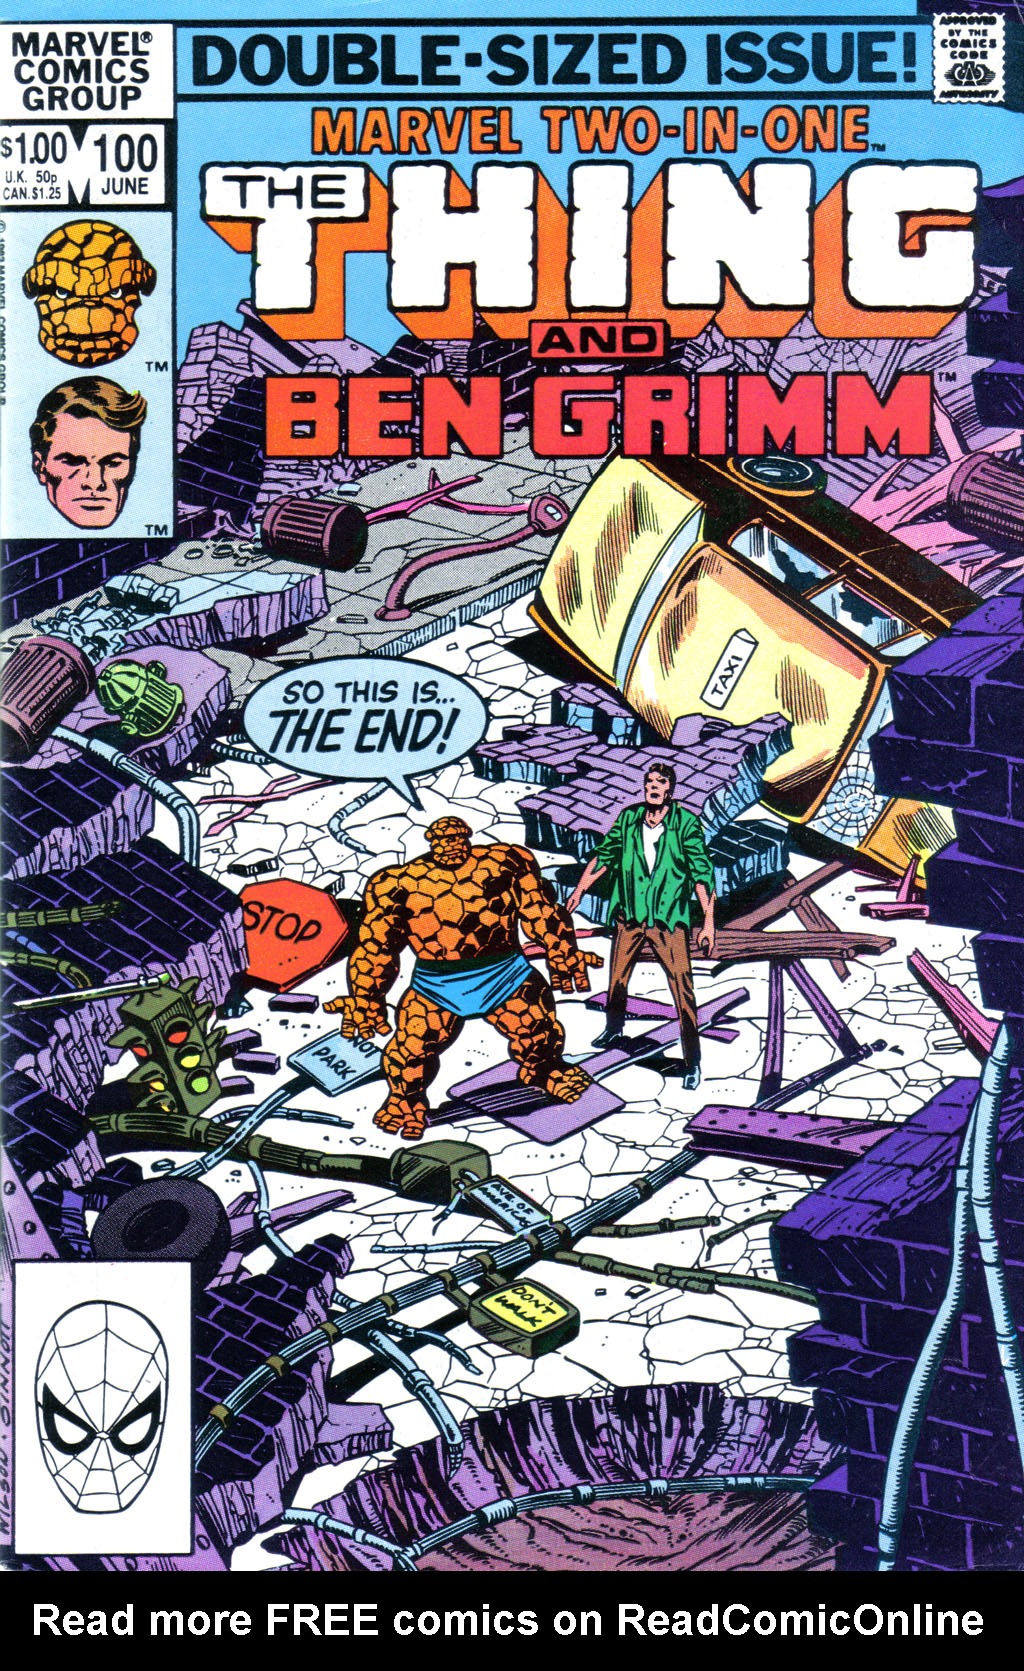 Read online Marvel Two-In-One comic -  Issue #100 - 1